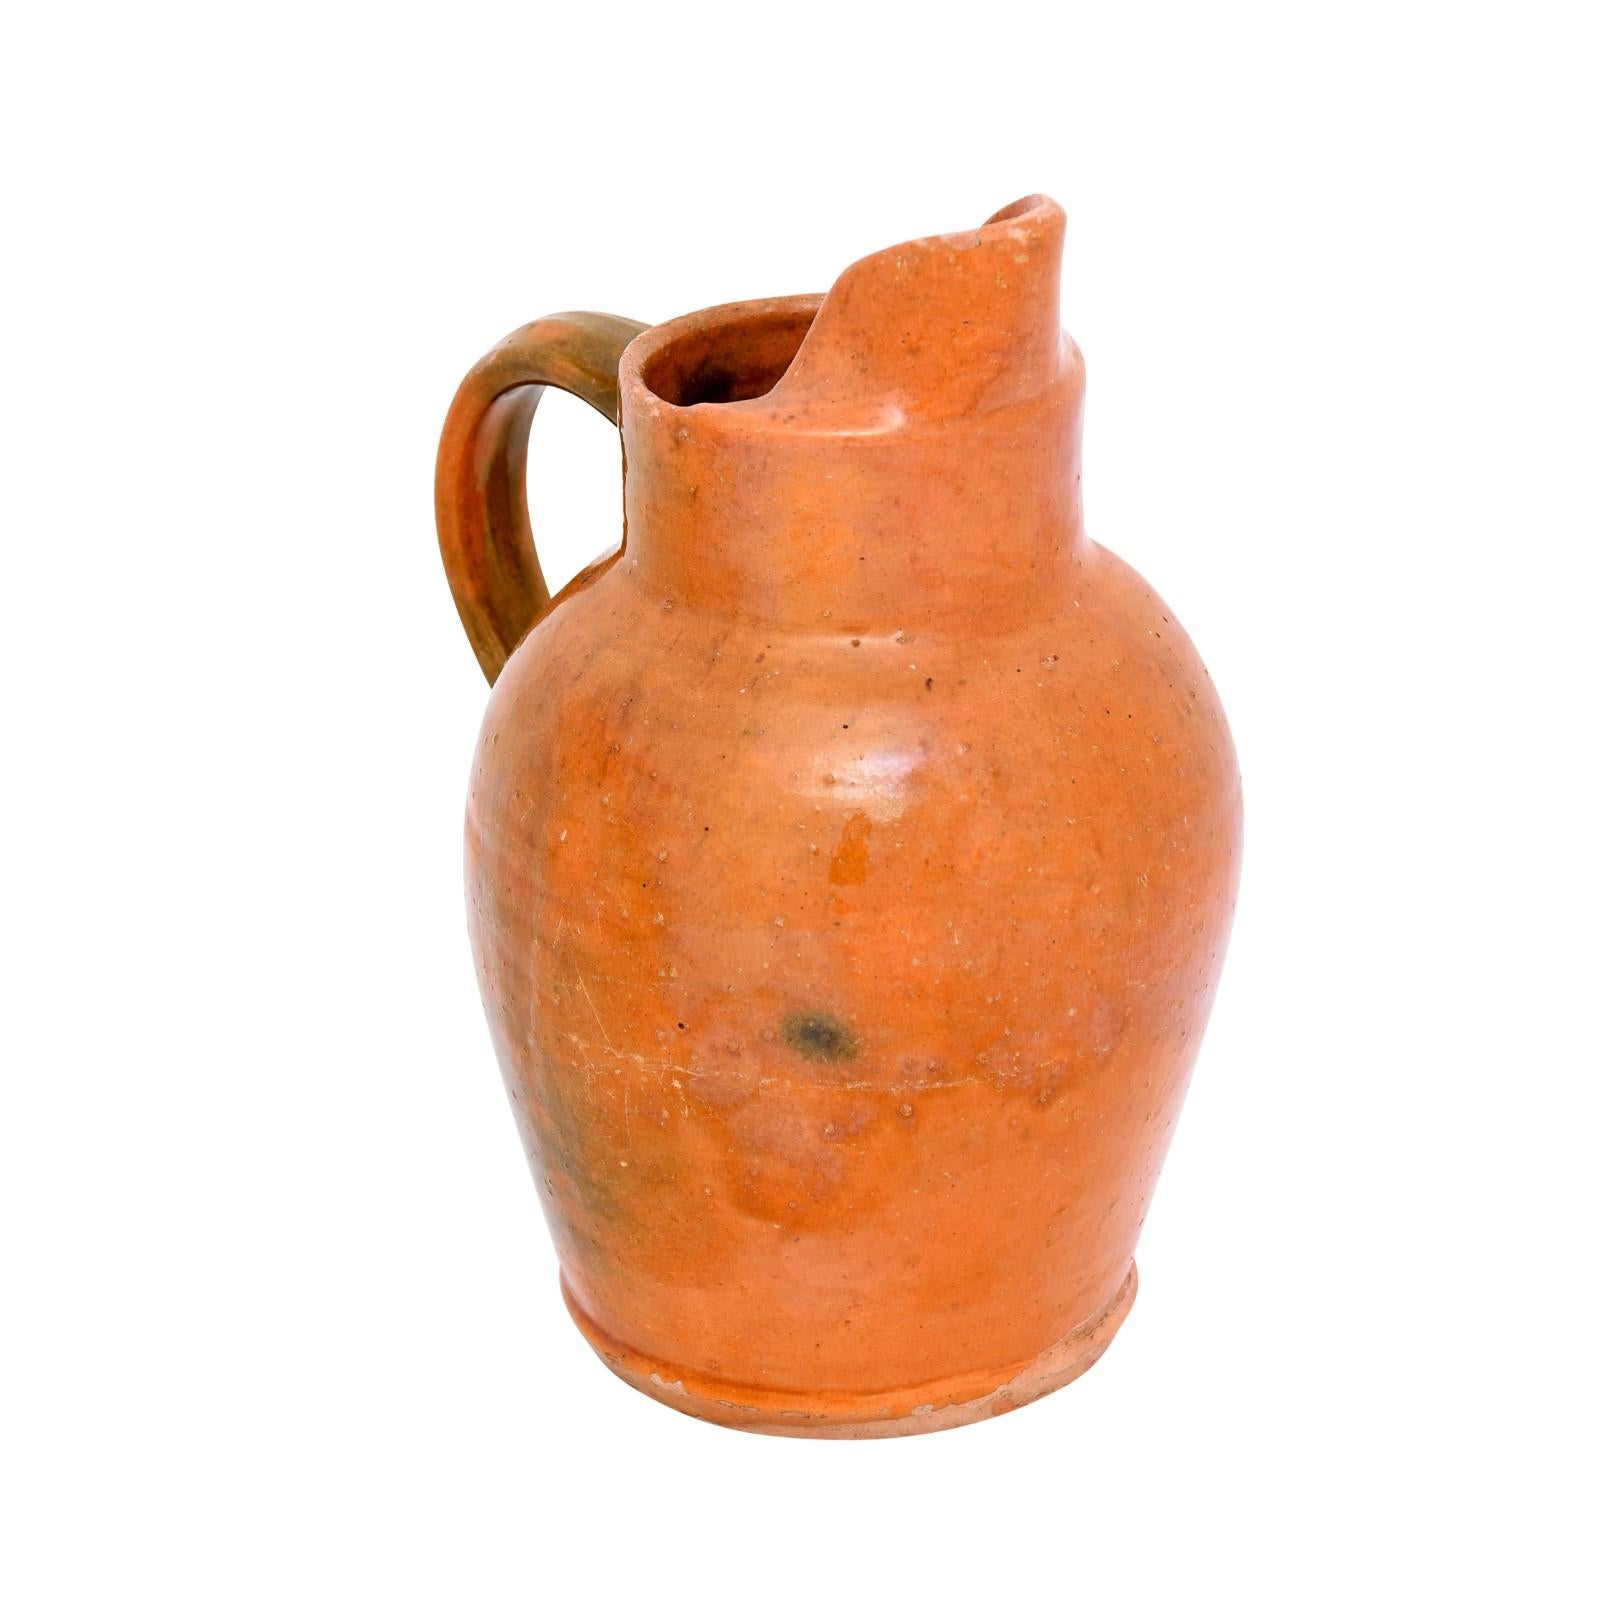 A French orange glazed pottery jug from the 19th century, made to store and serve wine or apple cider, with back handle and front spout. Step back in time with this French 19th-century pottery jug that embodies the rustic charm of traditional French